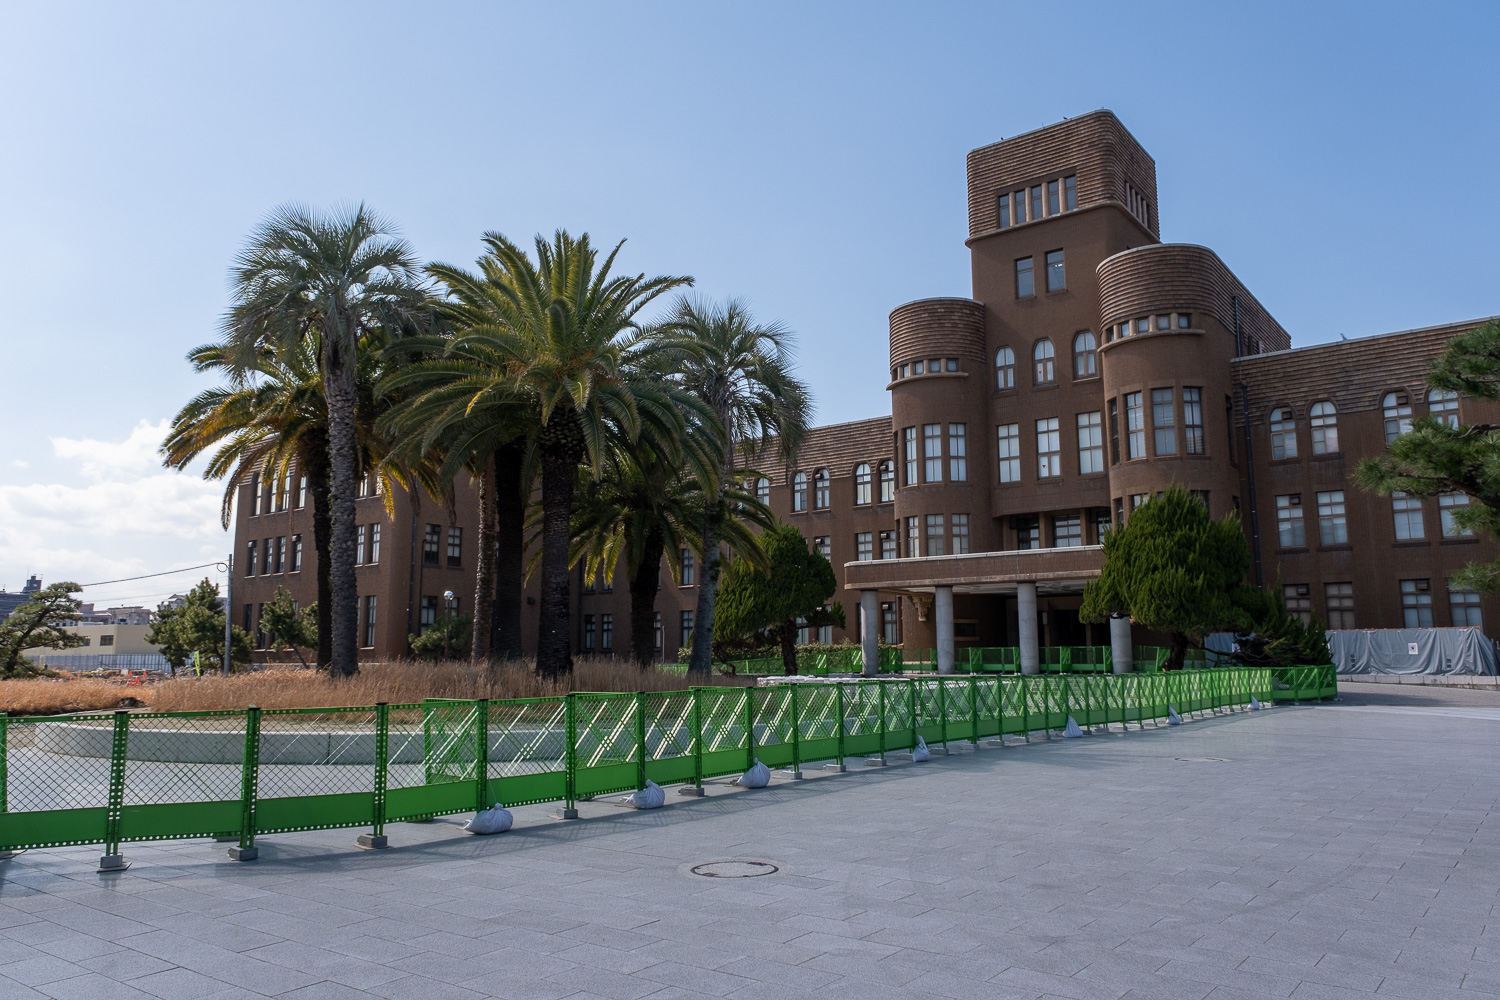 The historic science building that now houses the Kyūshū University Museum was registered as a tangible cultural property in spring 2023. (© Hayashi Michiko)